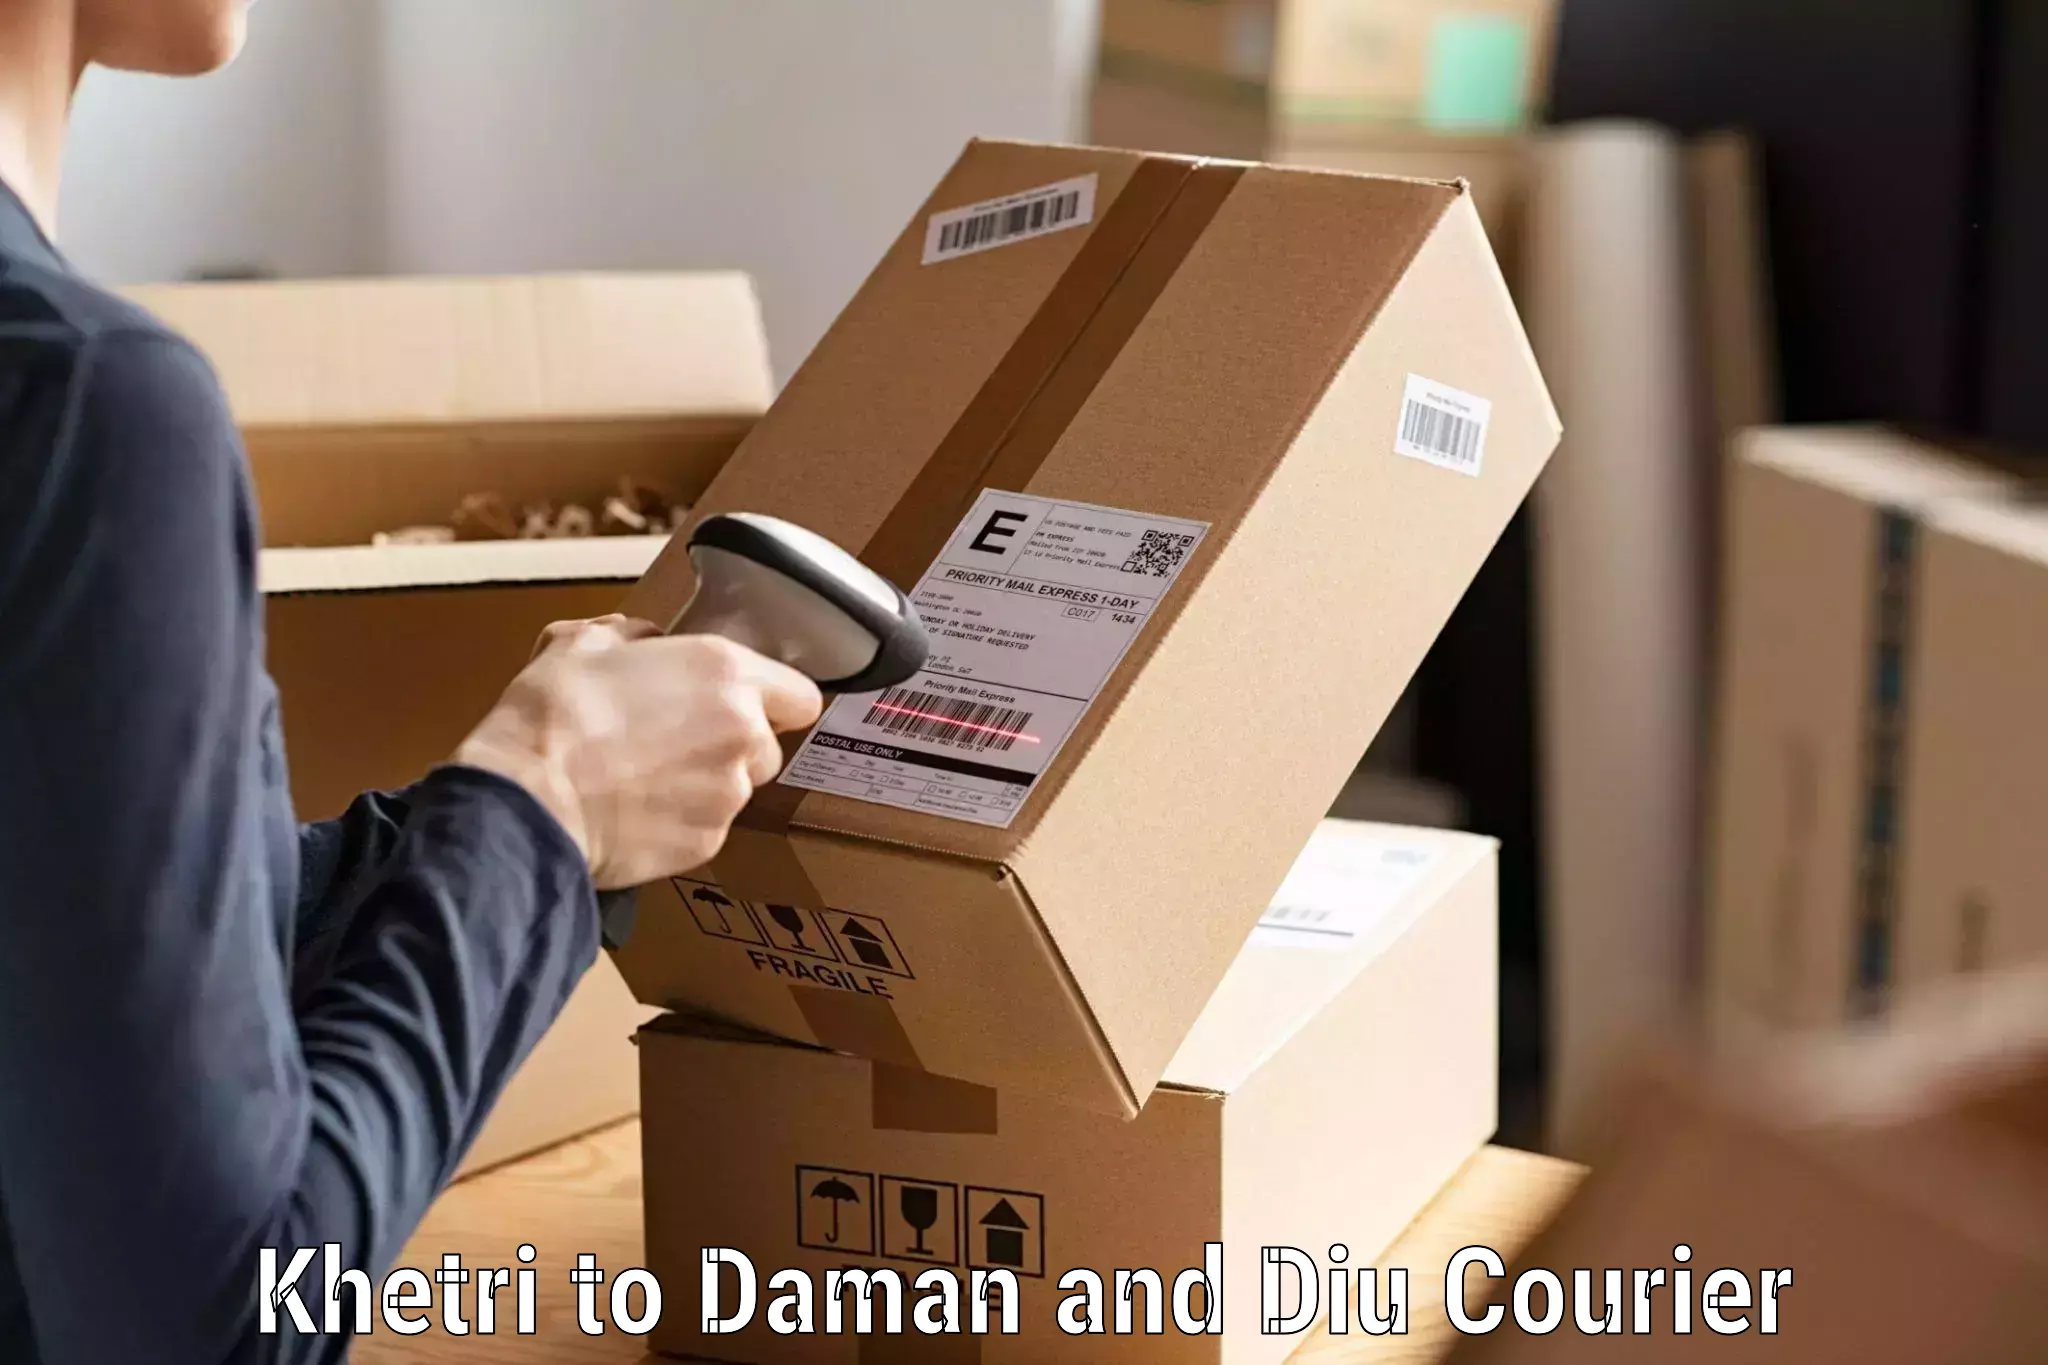 Online package tracking in Khetri to Daman